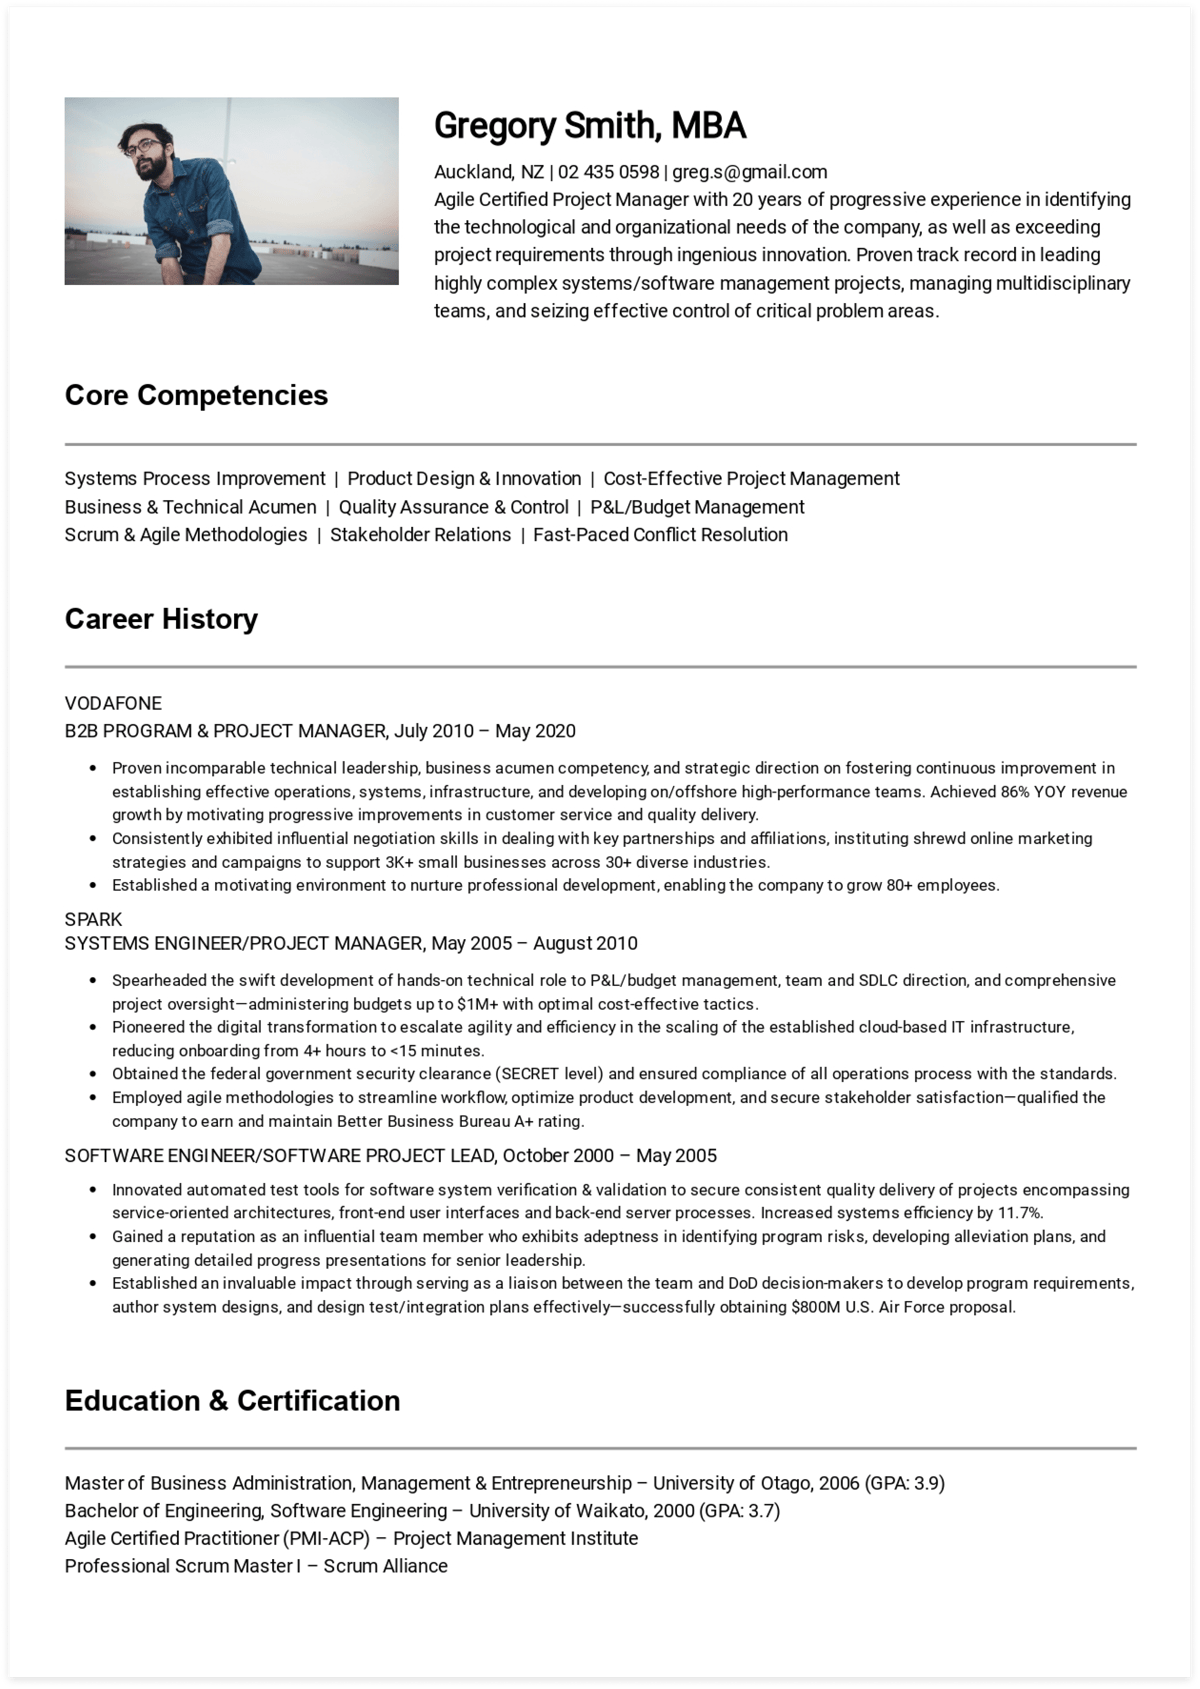 Click to download Gregory's Project Manager resume. Generated via CakeResume.